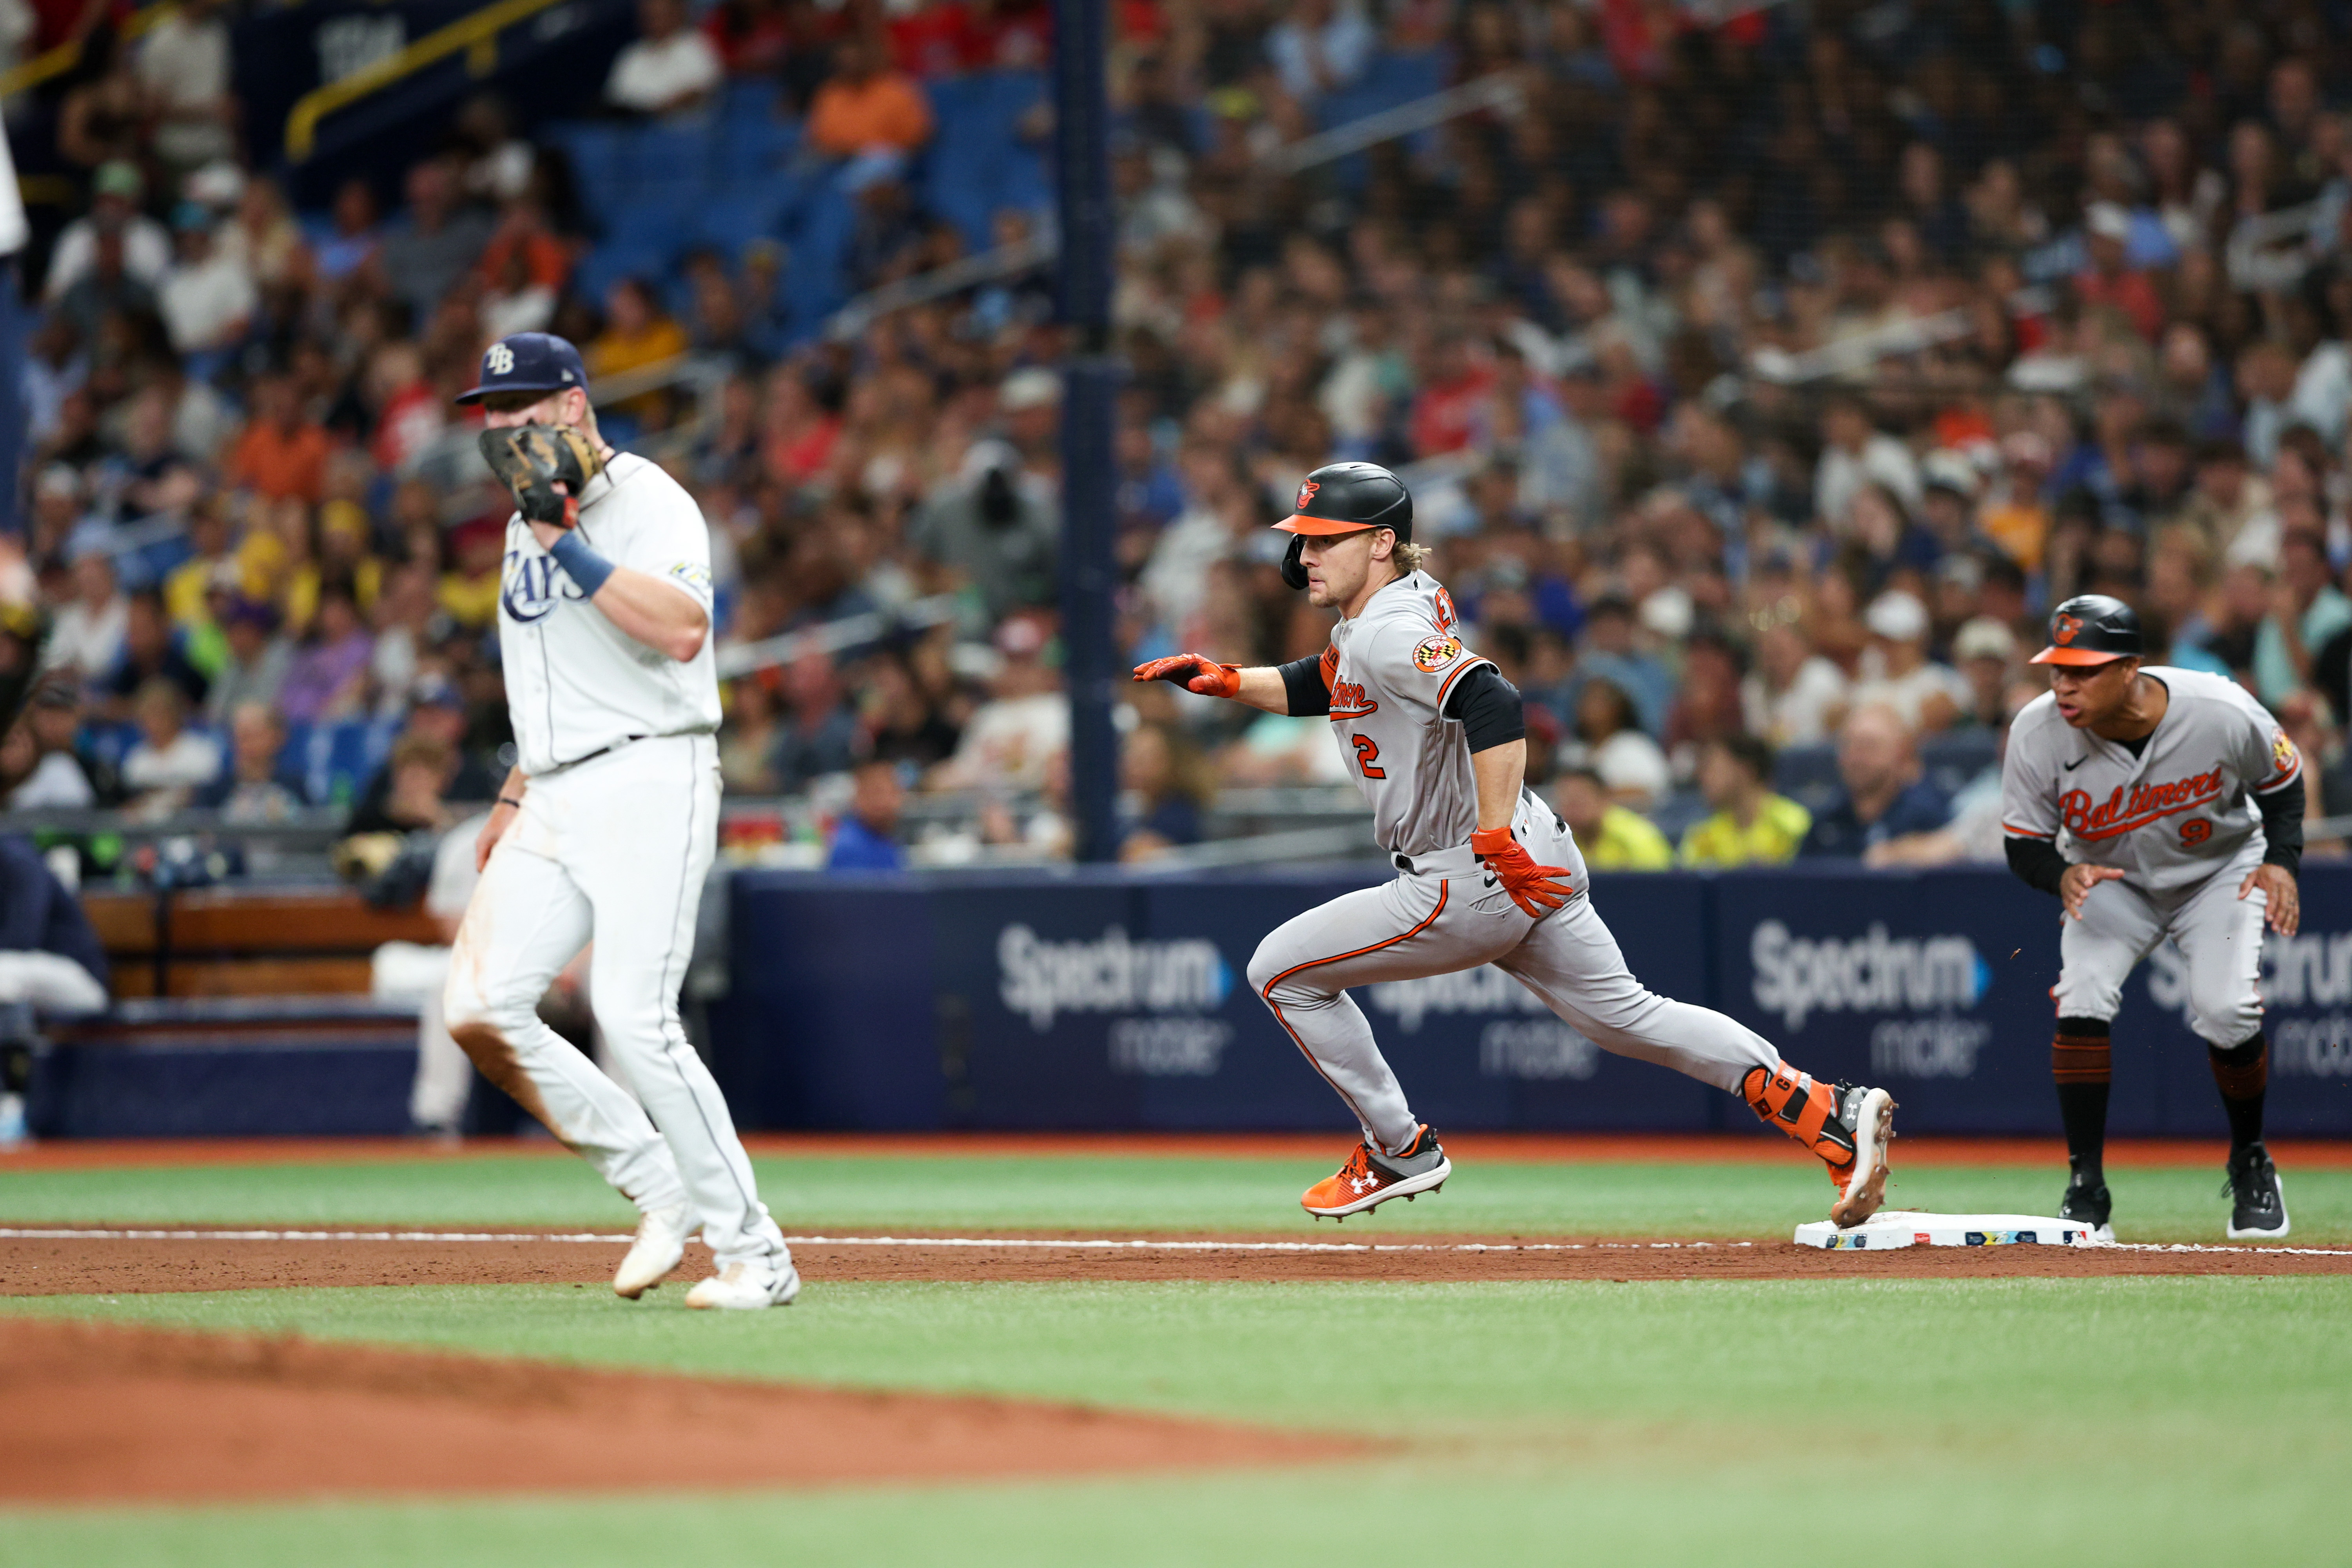 Orioles' Adley Rutschman Records First MLB Hit, Triples Against Tampa Bay  Rays - Fastball